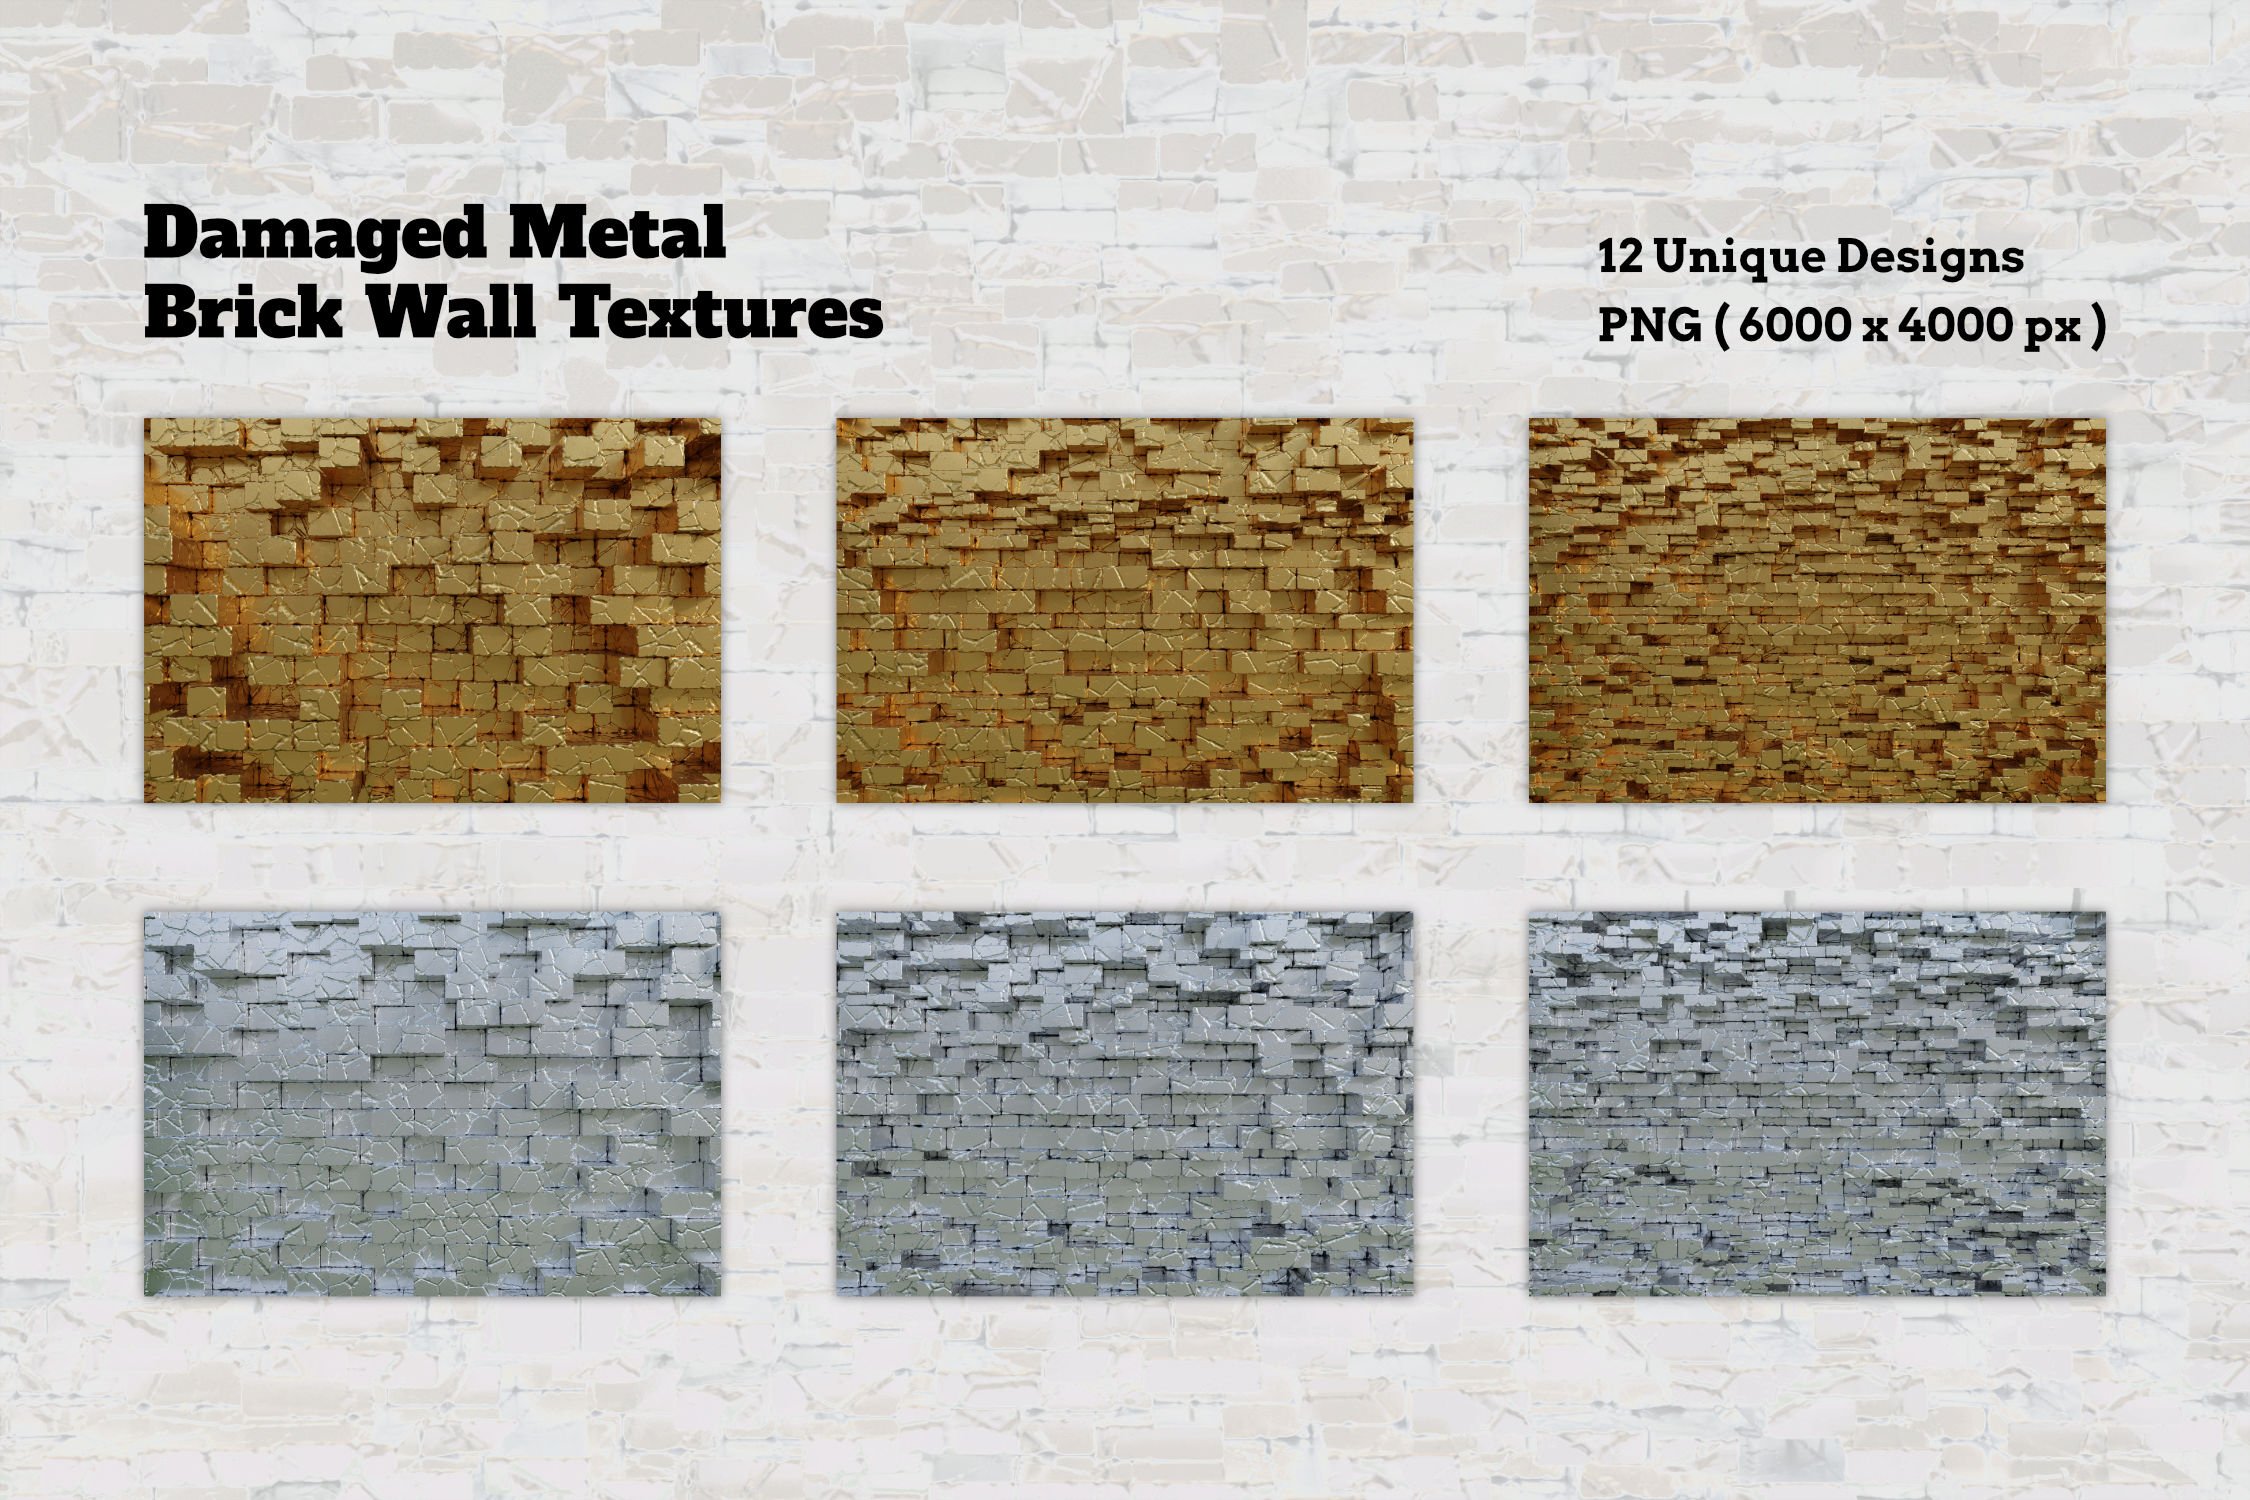 Damaged Metal Brick Wall Textures preview image.